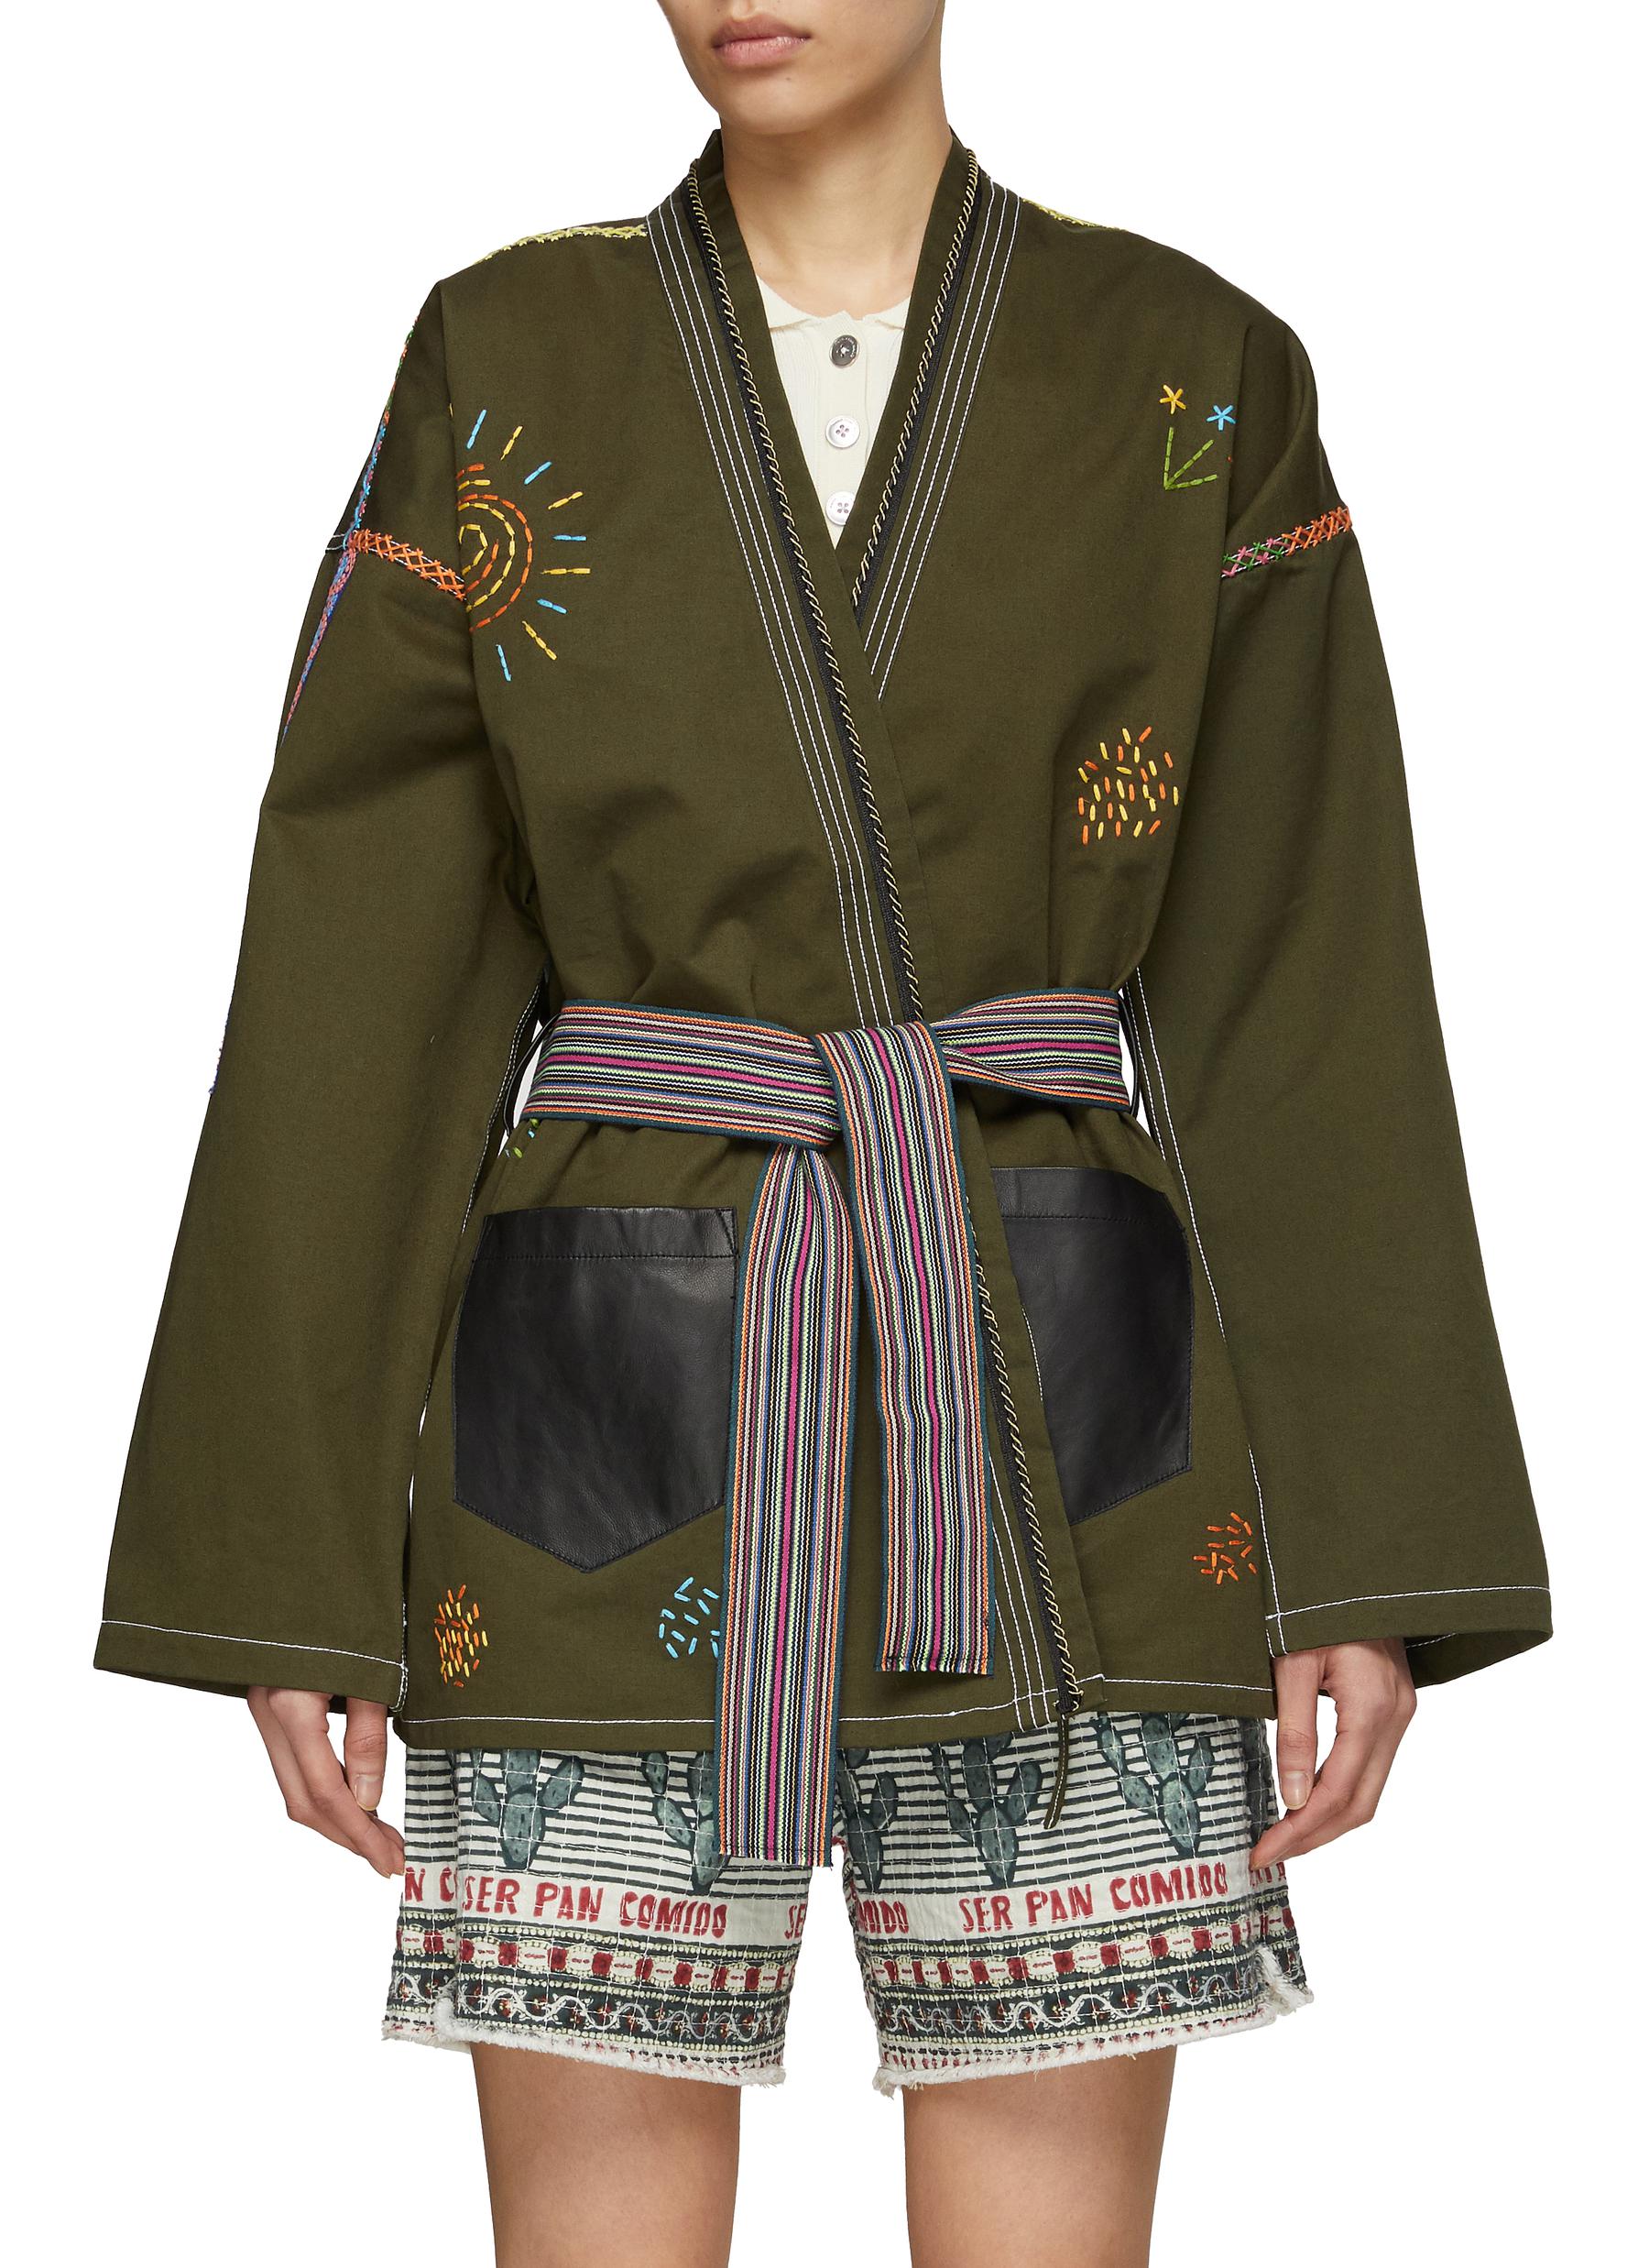 â€˜Le Voyageur’ Stitched Graphic Belted Kimono